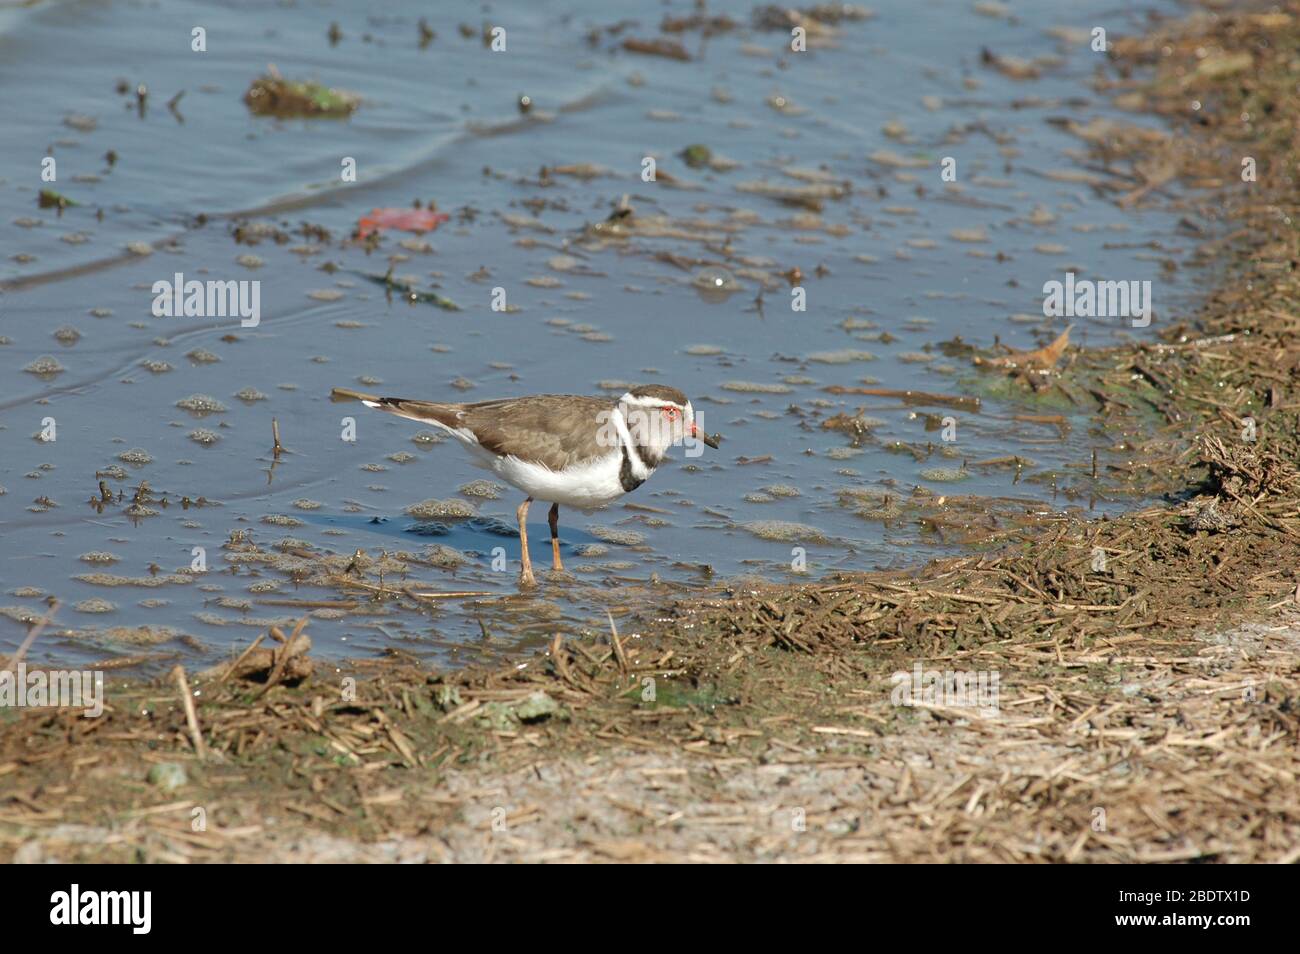 Three-banded Plover, Charadrius tricollaris, in shallows of waterhole, Kruger National Park, Mpumalanga province, South Africa, Africa Stock Photo